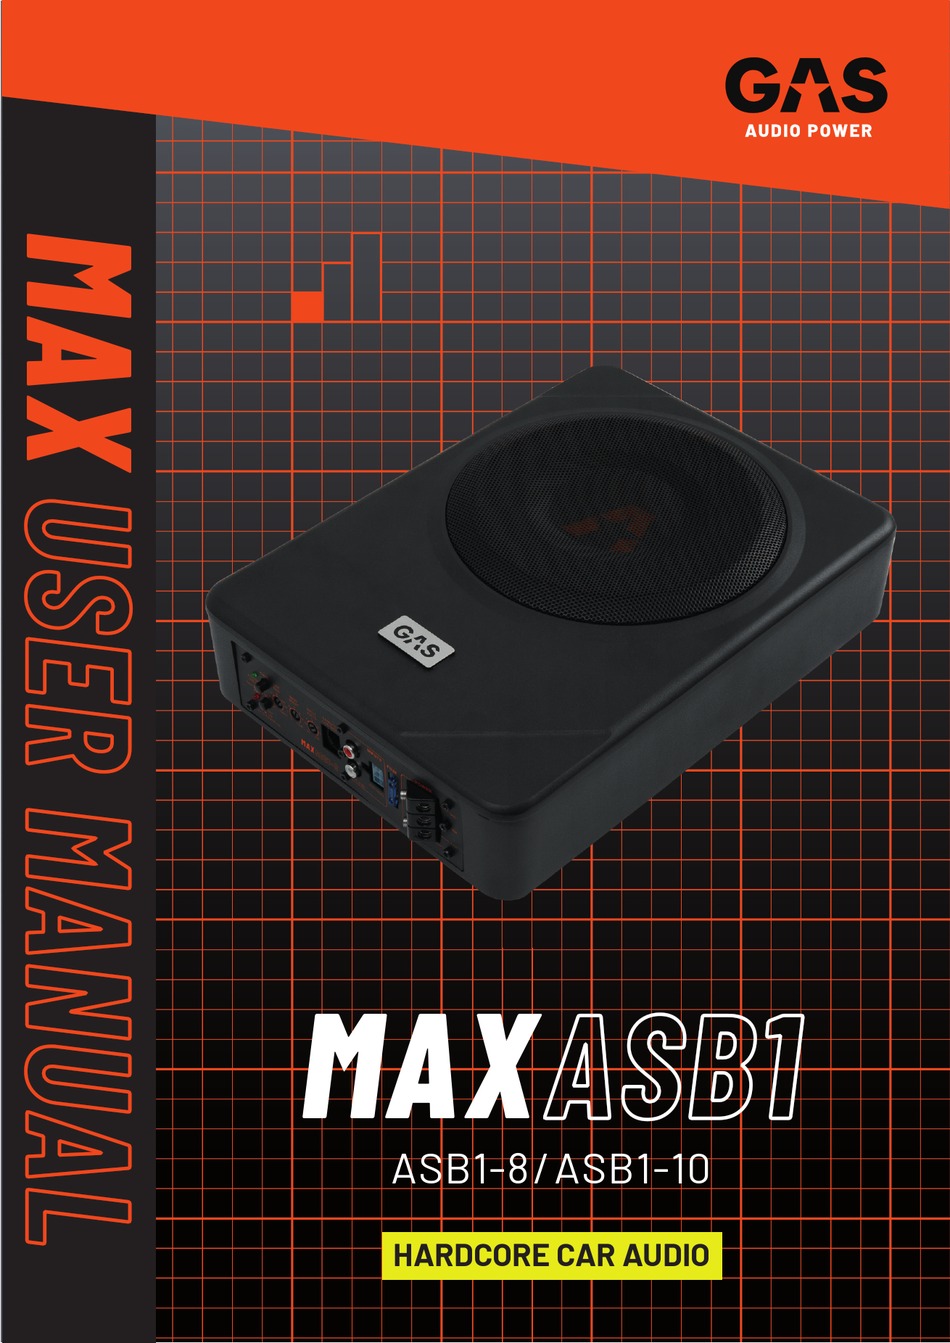 GAS AUDIO MAX ASB1-8 MAX-series Level 1 Amplified Subwoofer 8